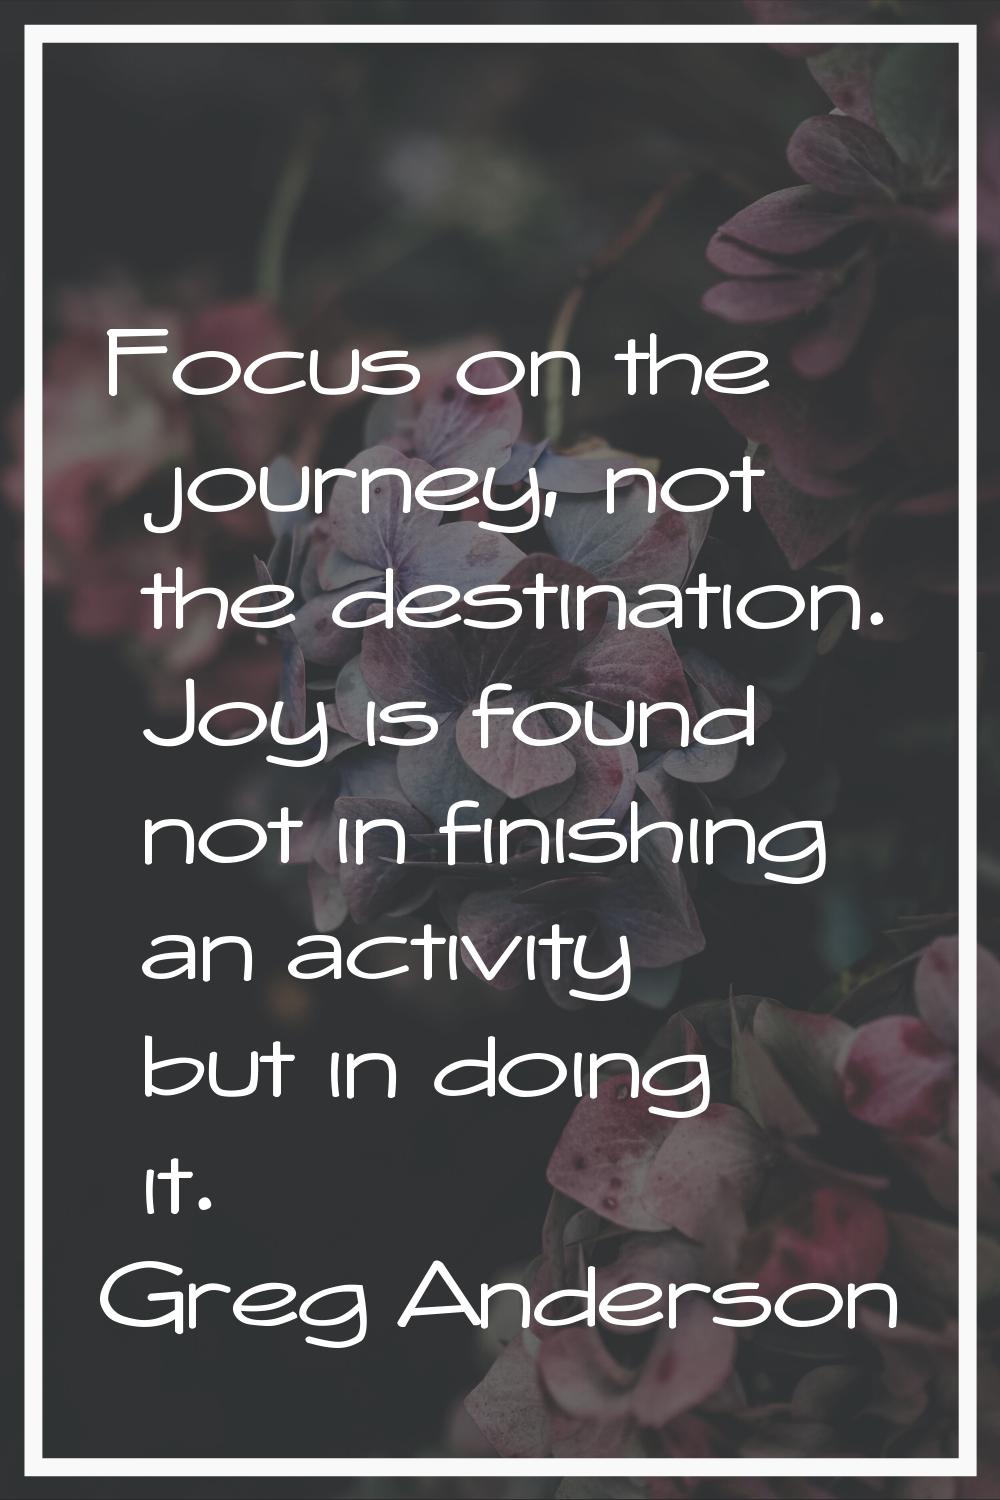 Focus on the journey, not the destination. Joy is found not in finishing an activity but in doing i